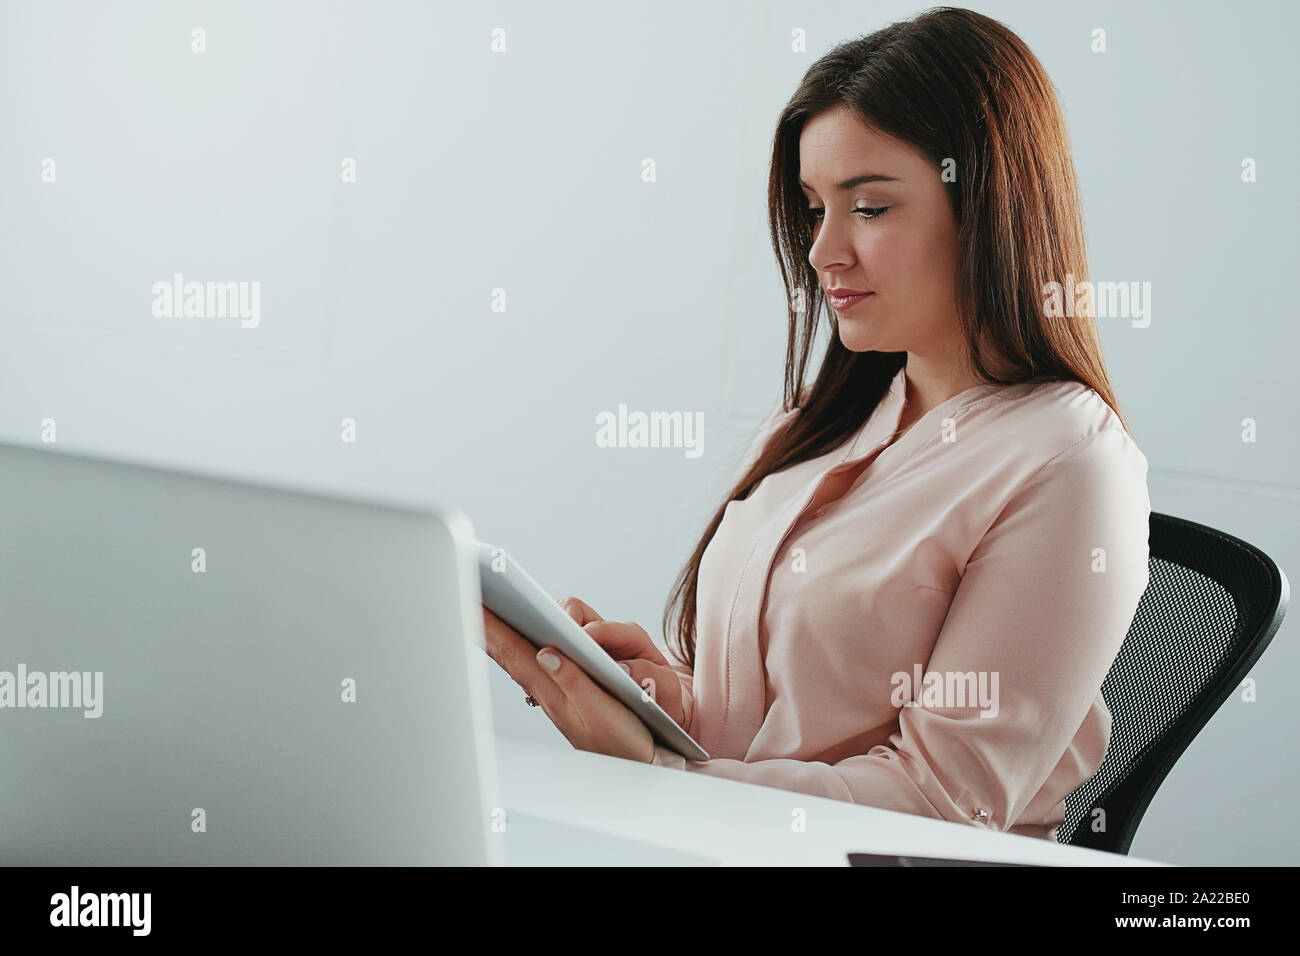 Beau young businesswoman sitting in front of laptop using digital tablet in office Banque D'Images